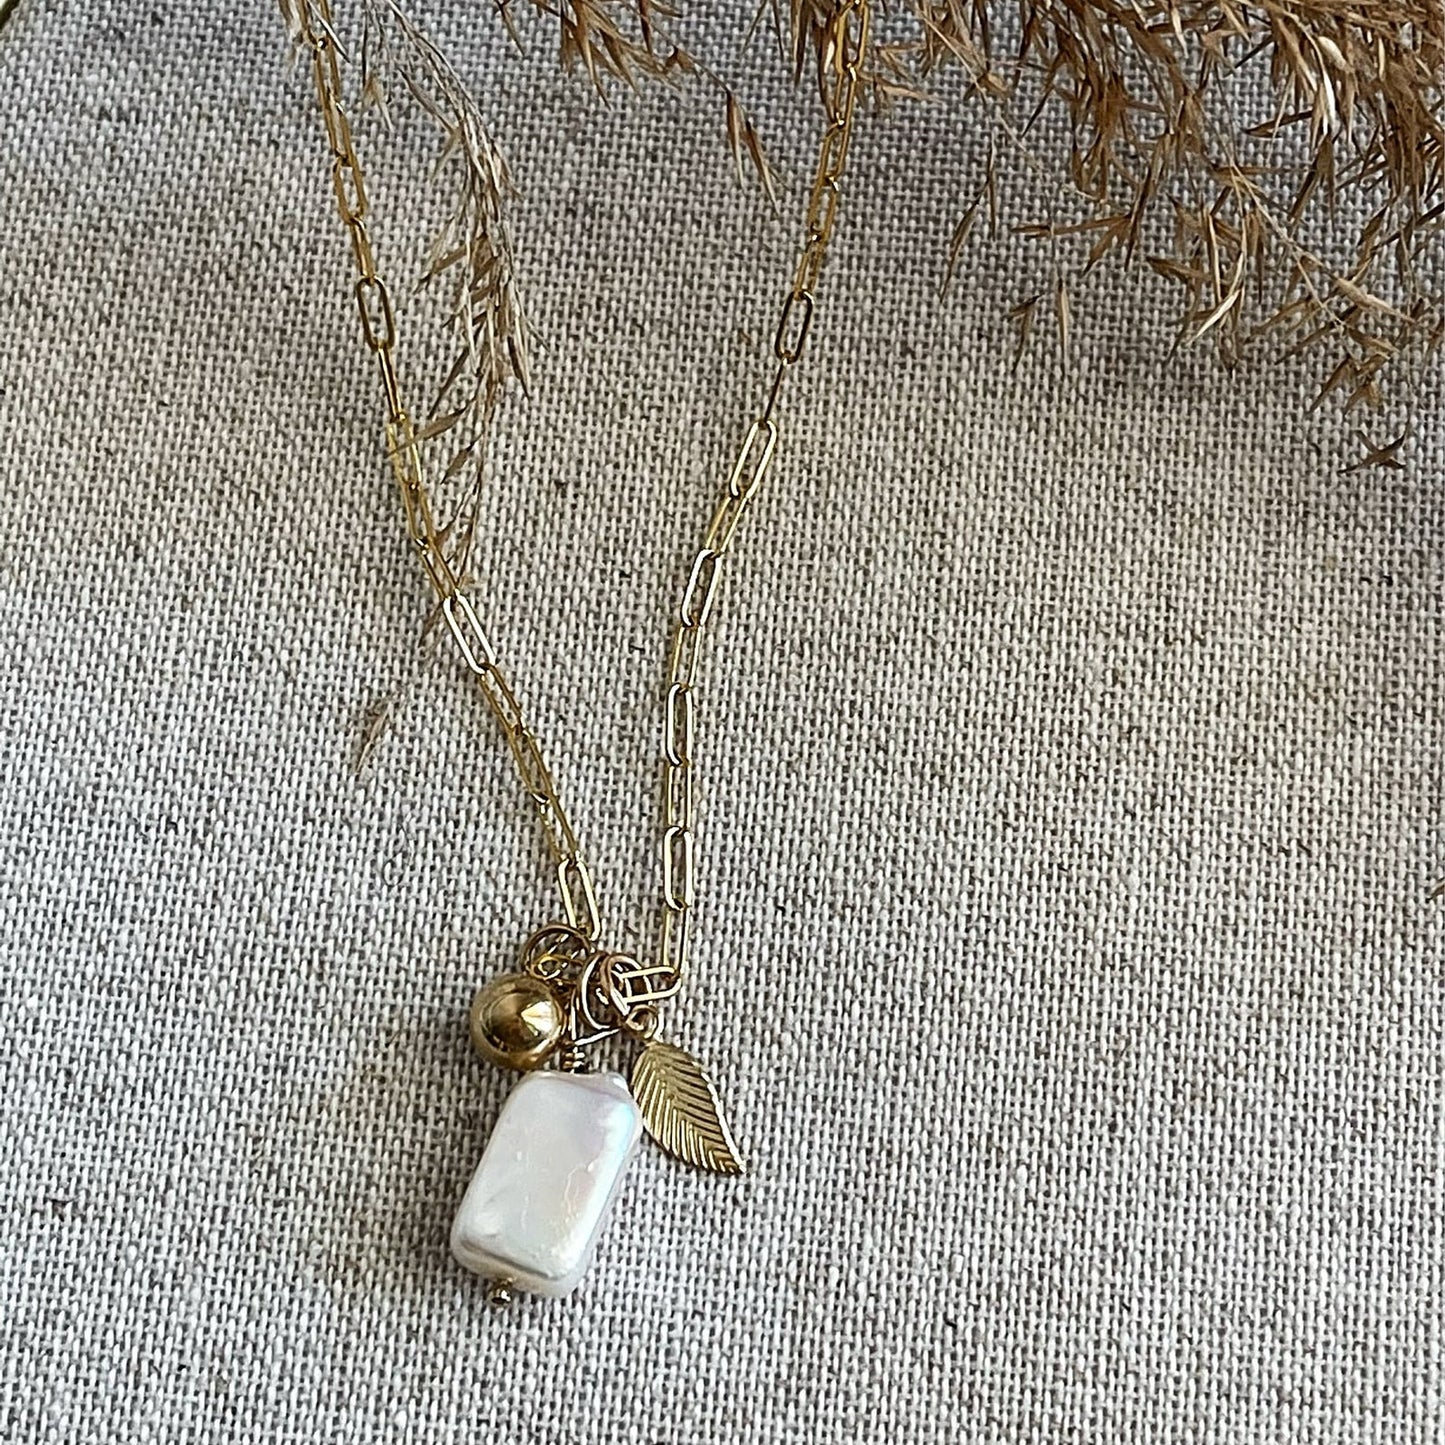 Melodie Necklace